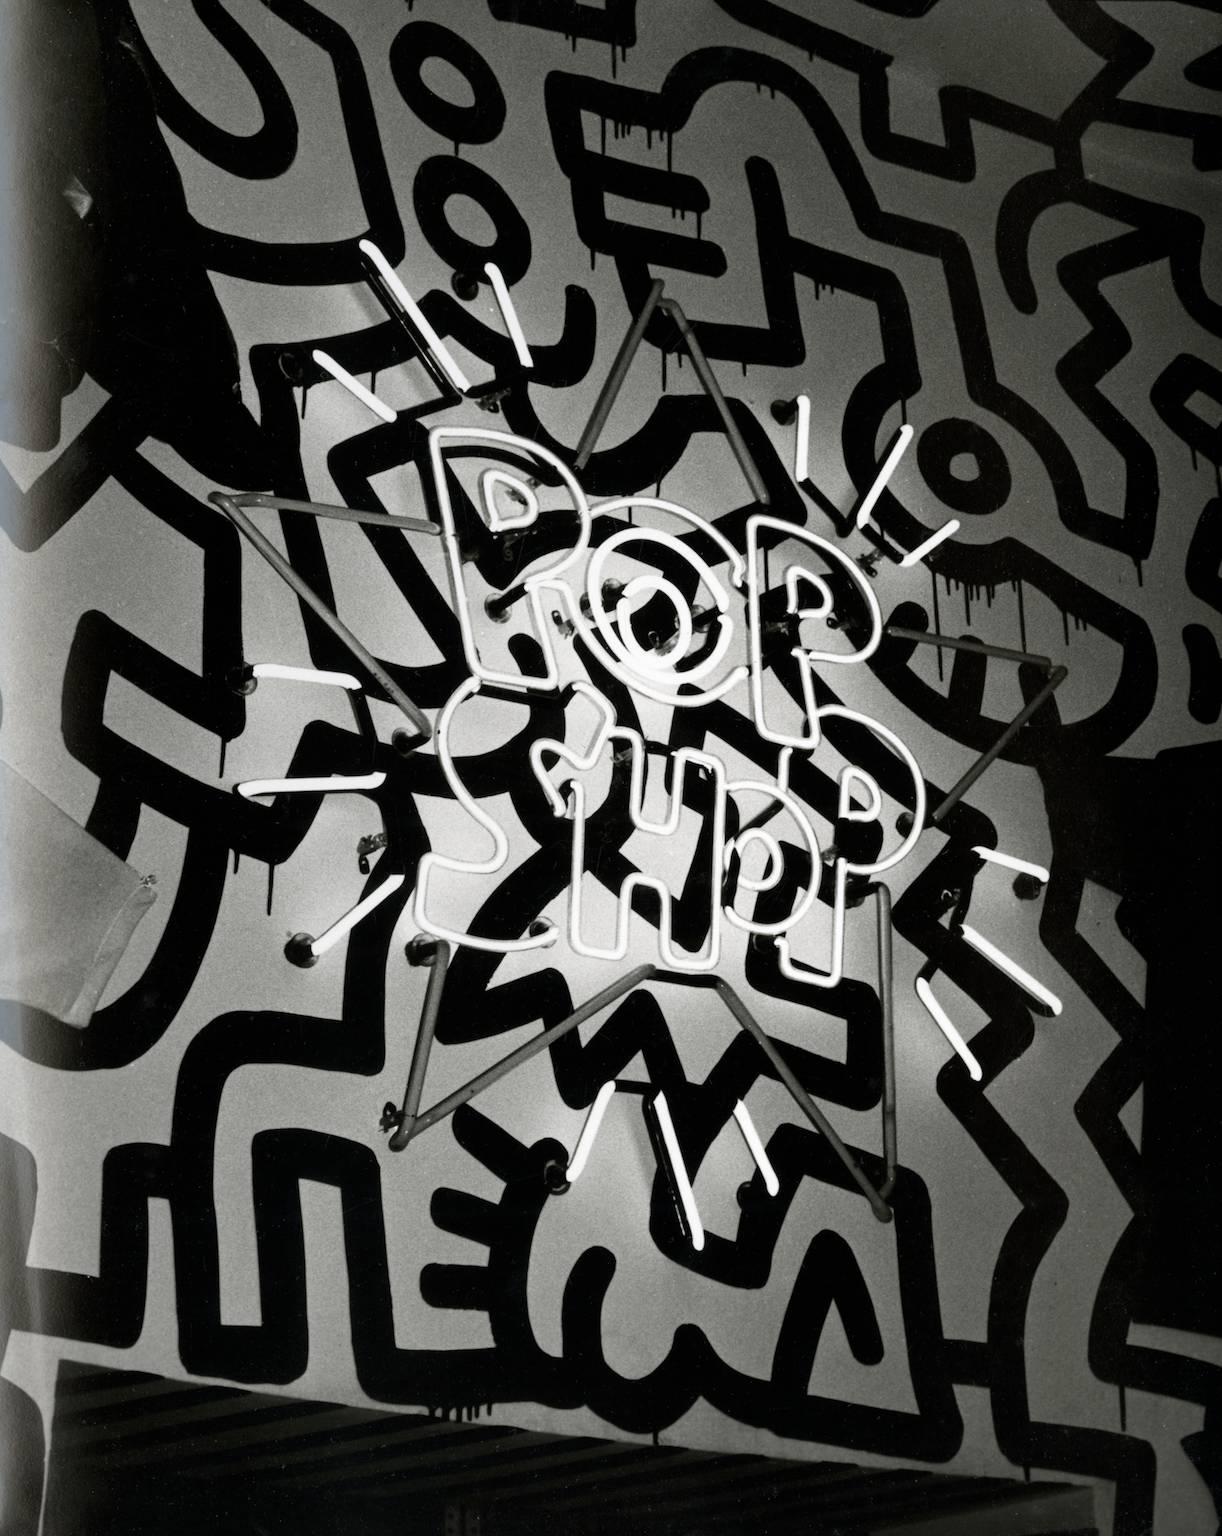 Andy Warhol Black and White Photograph - Photograph of Keith Haring's POP Shop, Soho, 1986